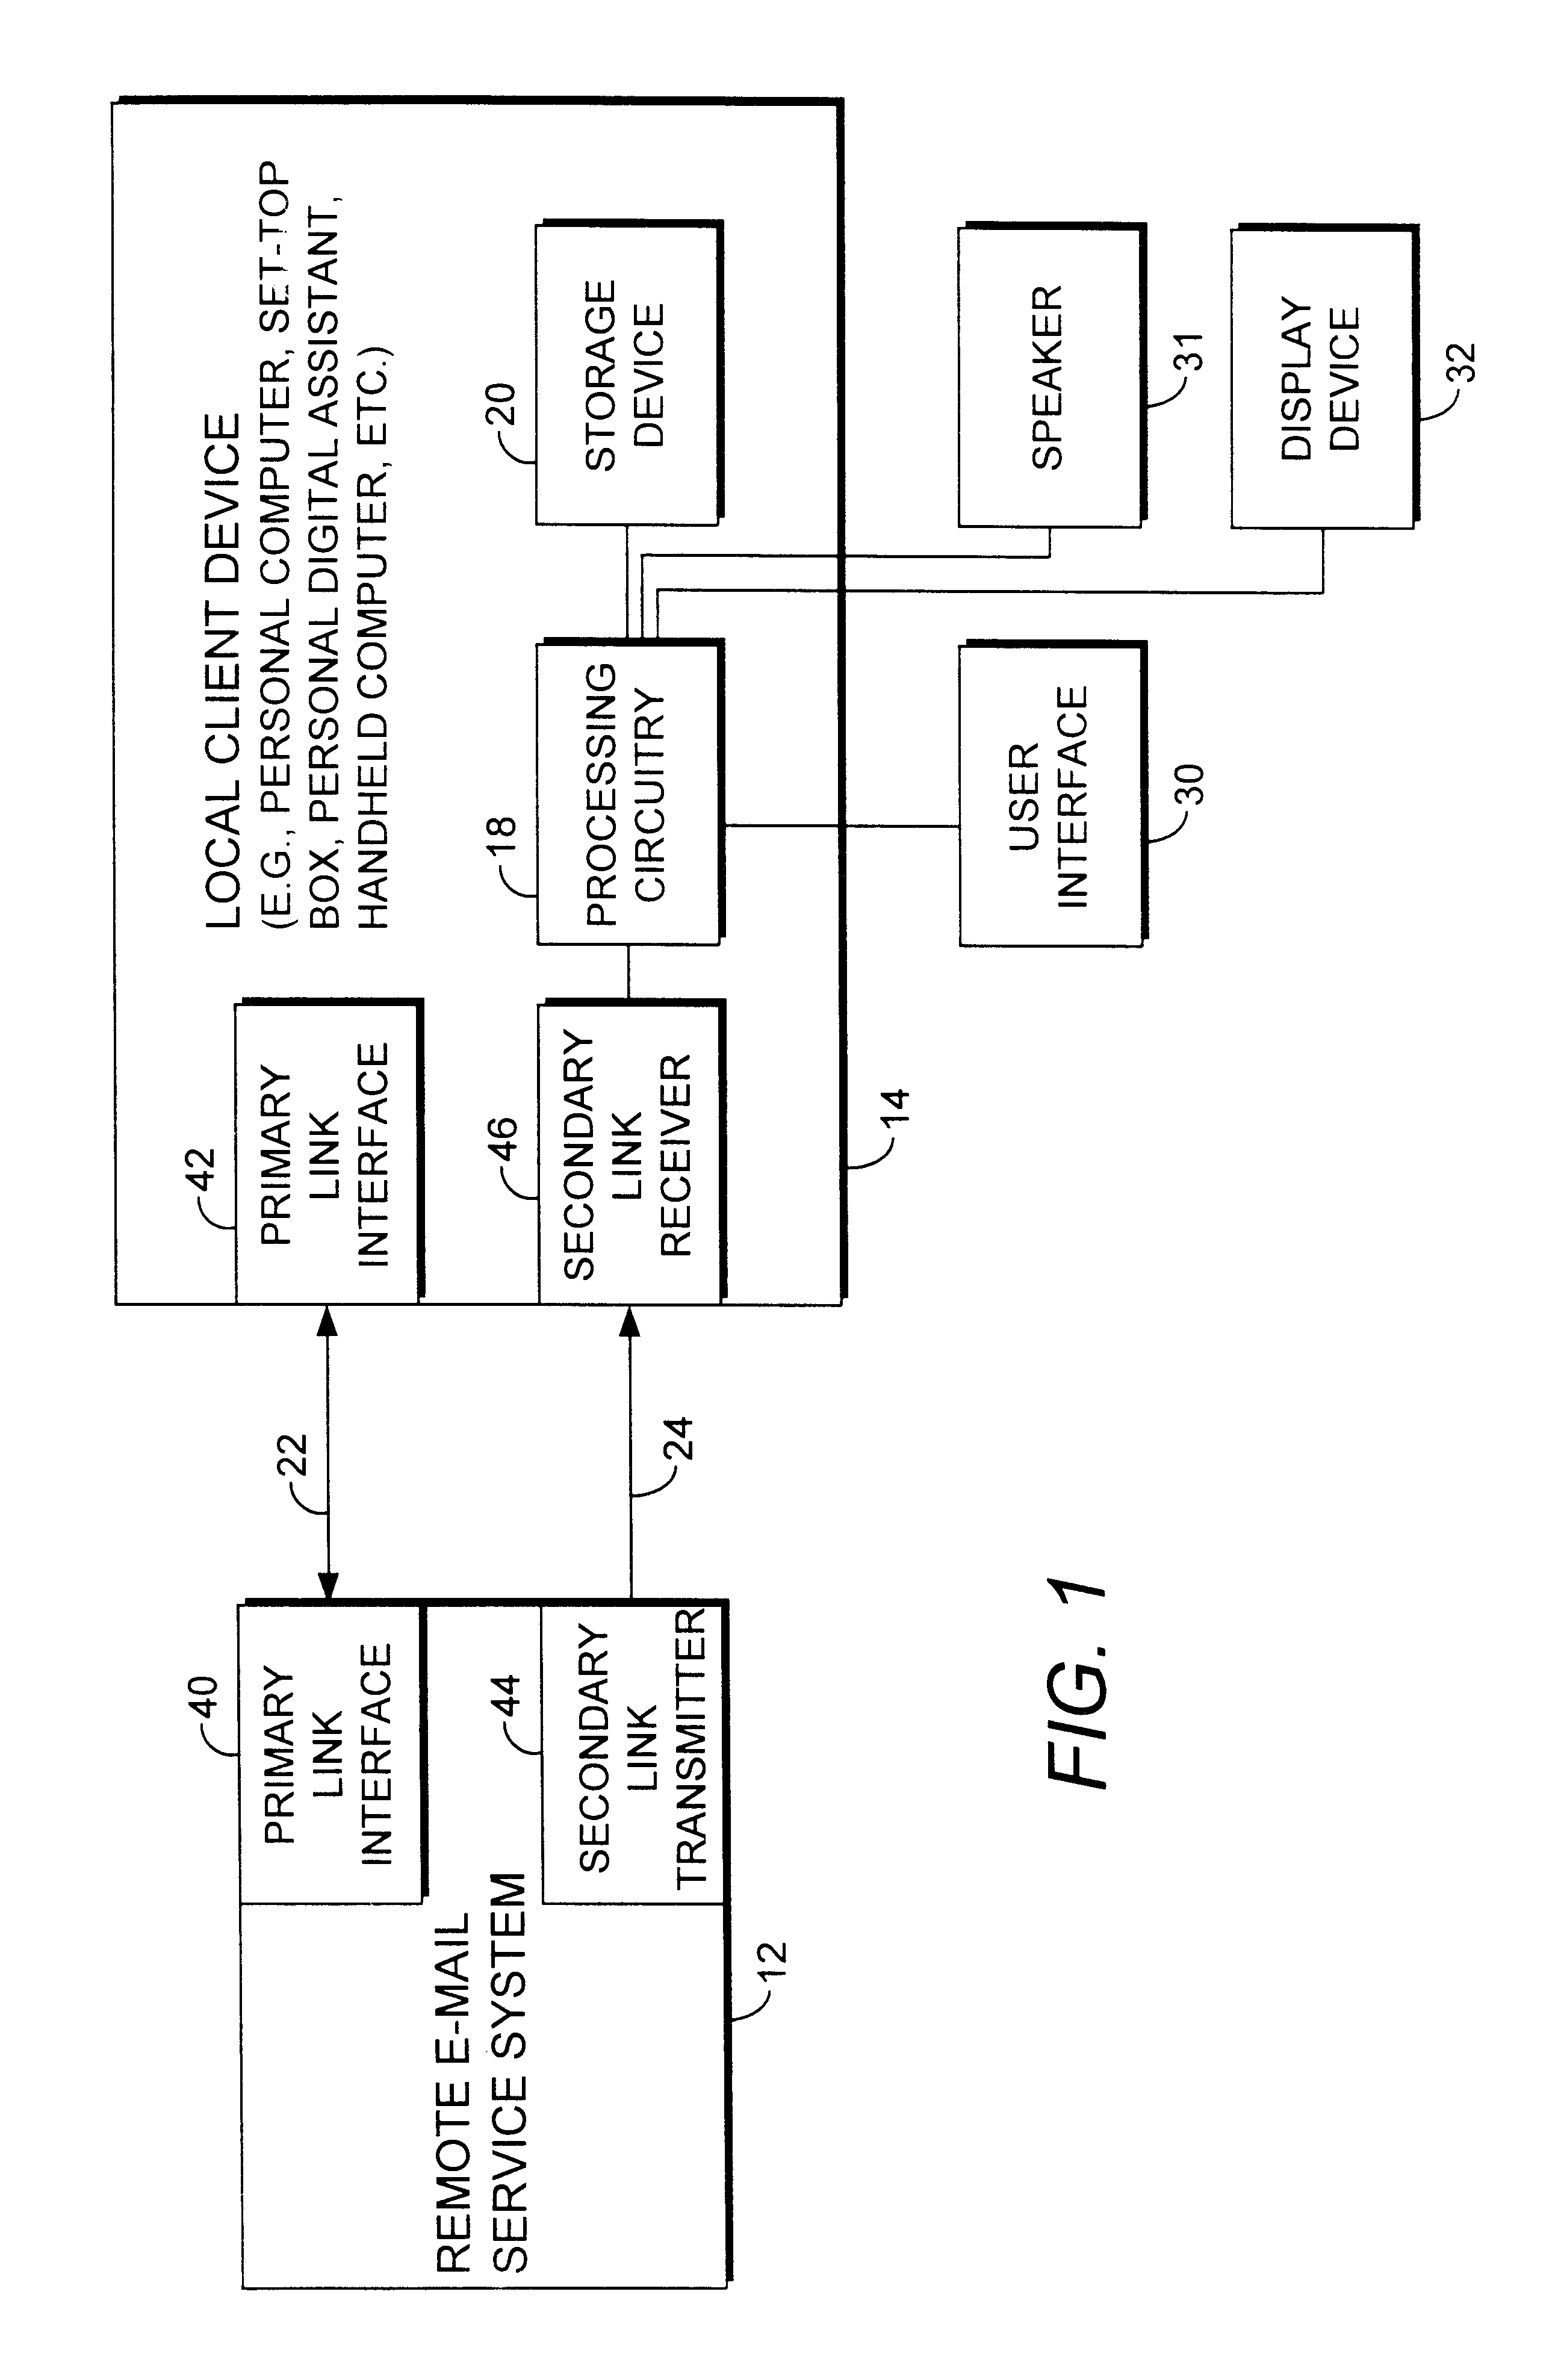 Electronic mail system employing a low bandwidth link for e-mail notifications